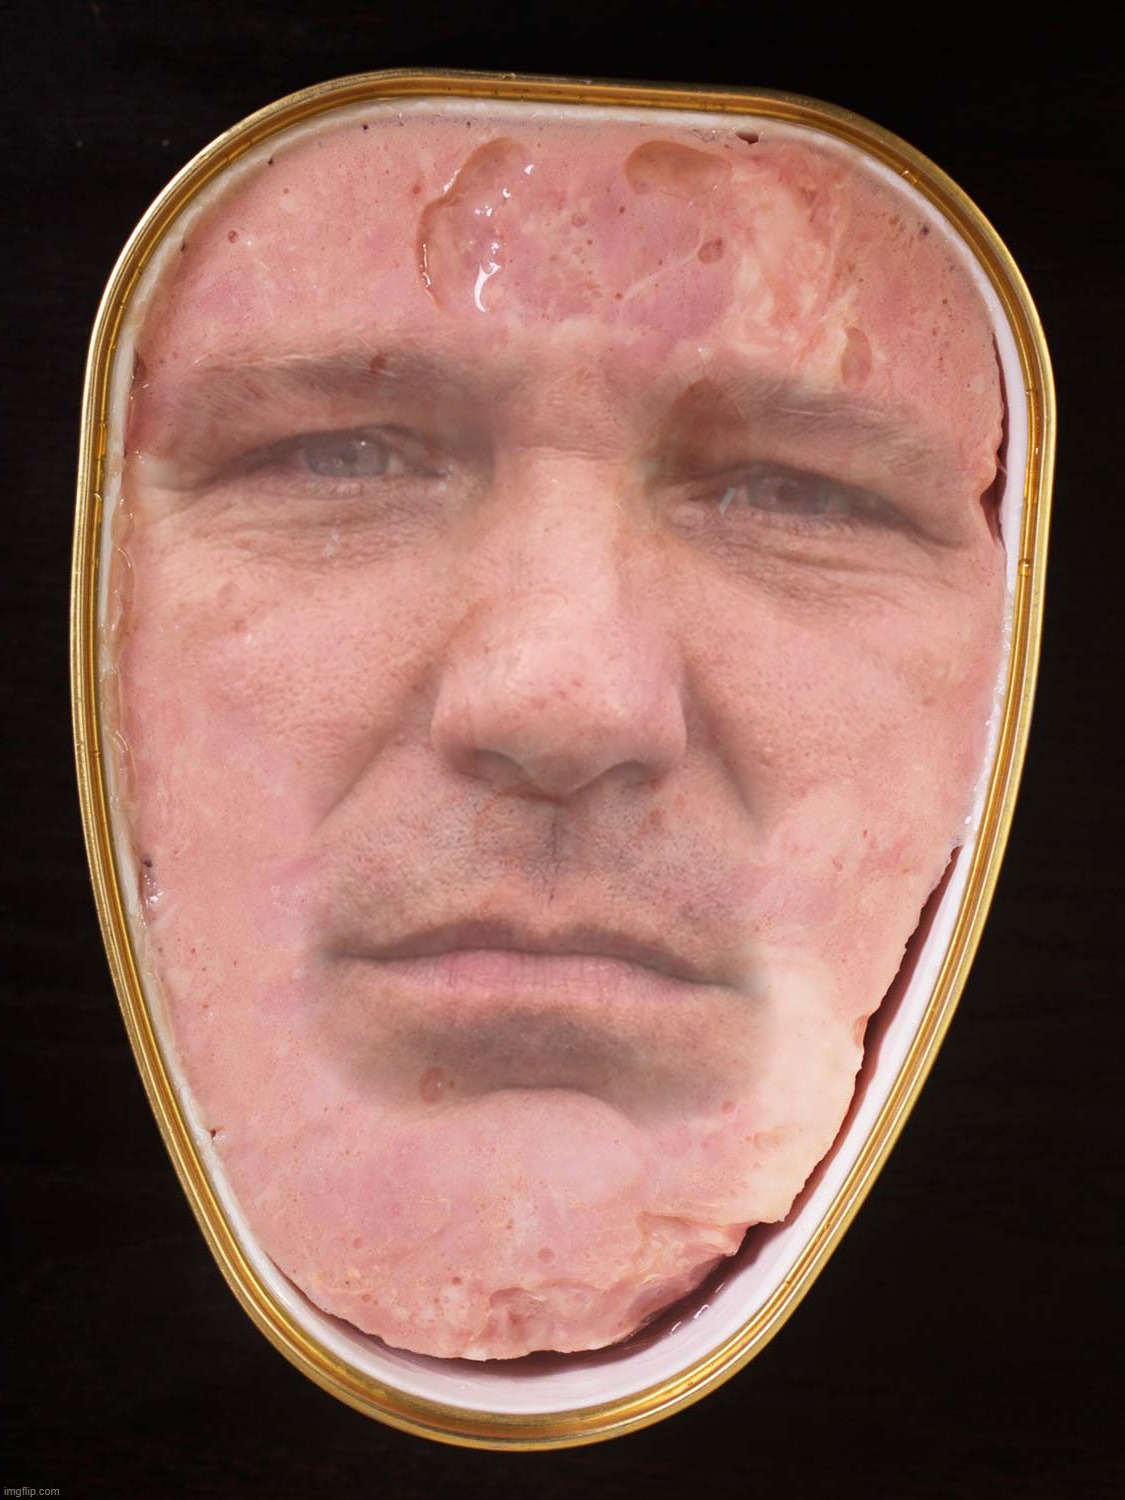 meatball ron is meathead and meat wad... | image tagged in meat,ball,meathead,meatwad,ham,head | made w/ Imgflip meme maker